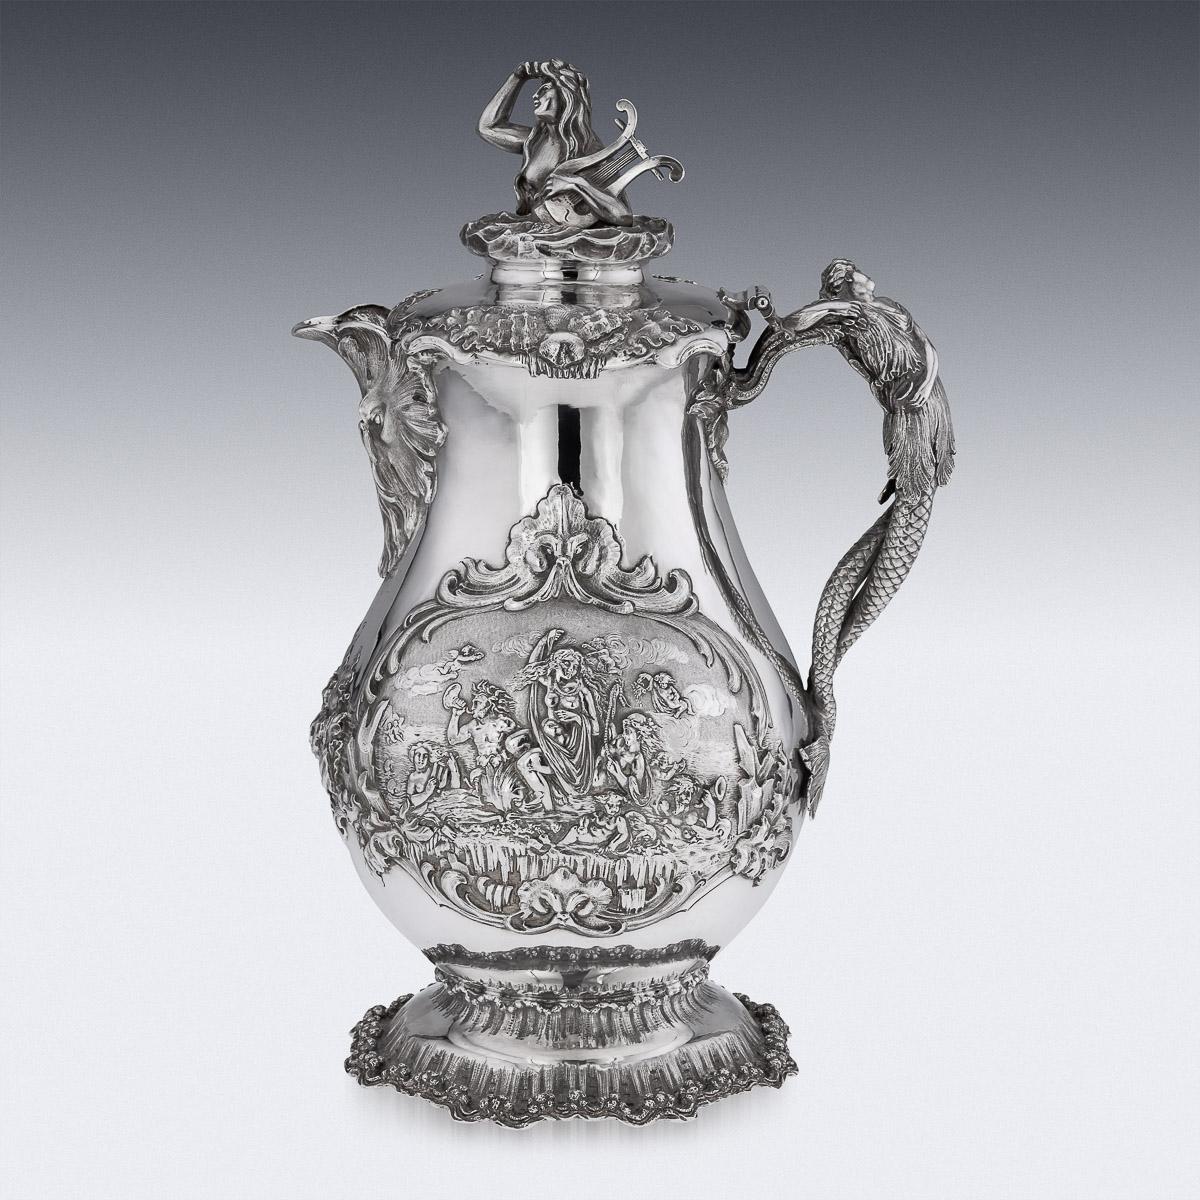 British 19th Century Victorian Solid Silver Nautical Jug, George Angell, c.1859 For Sale